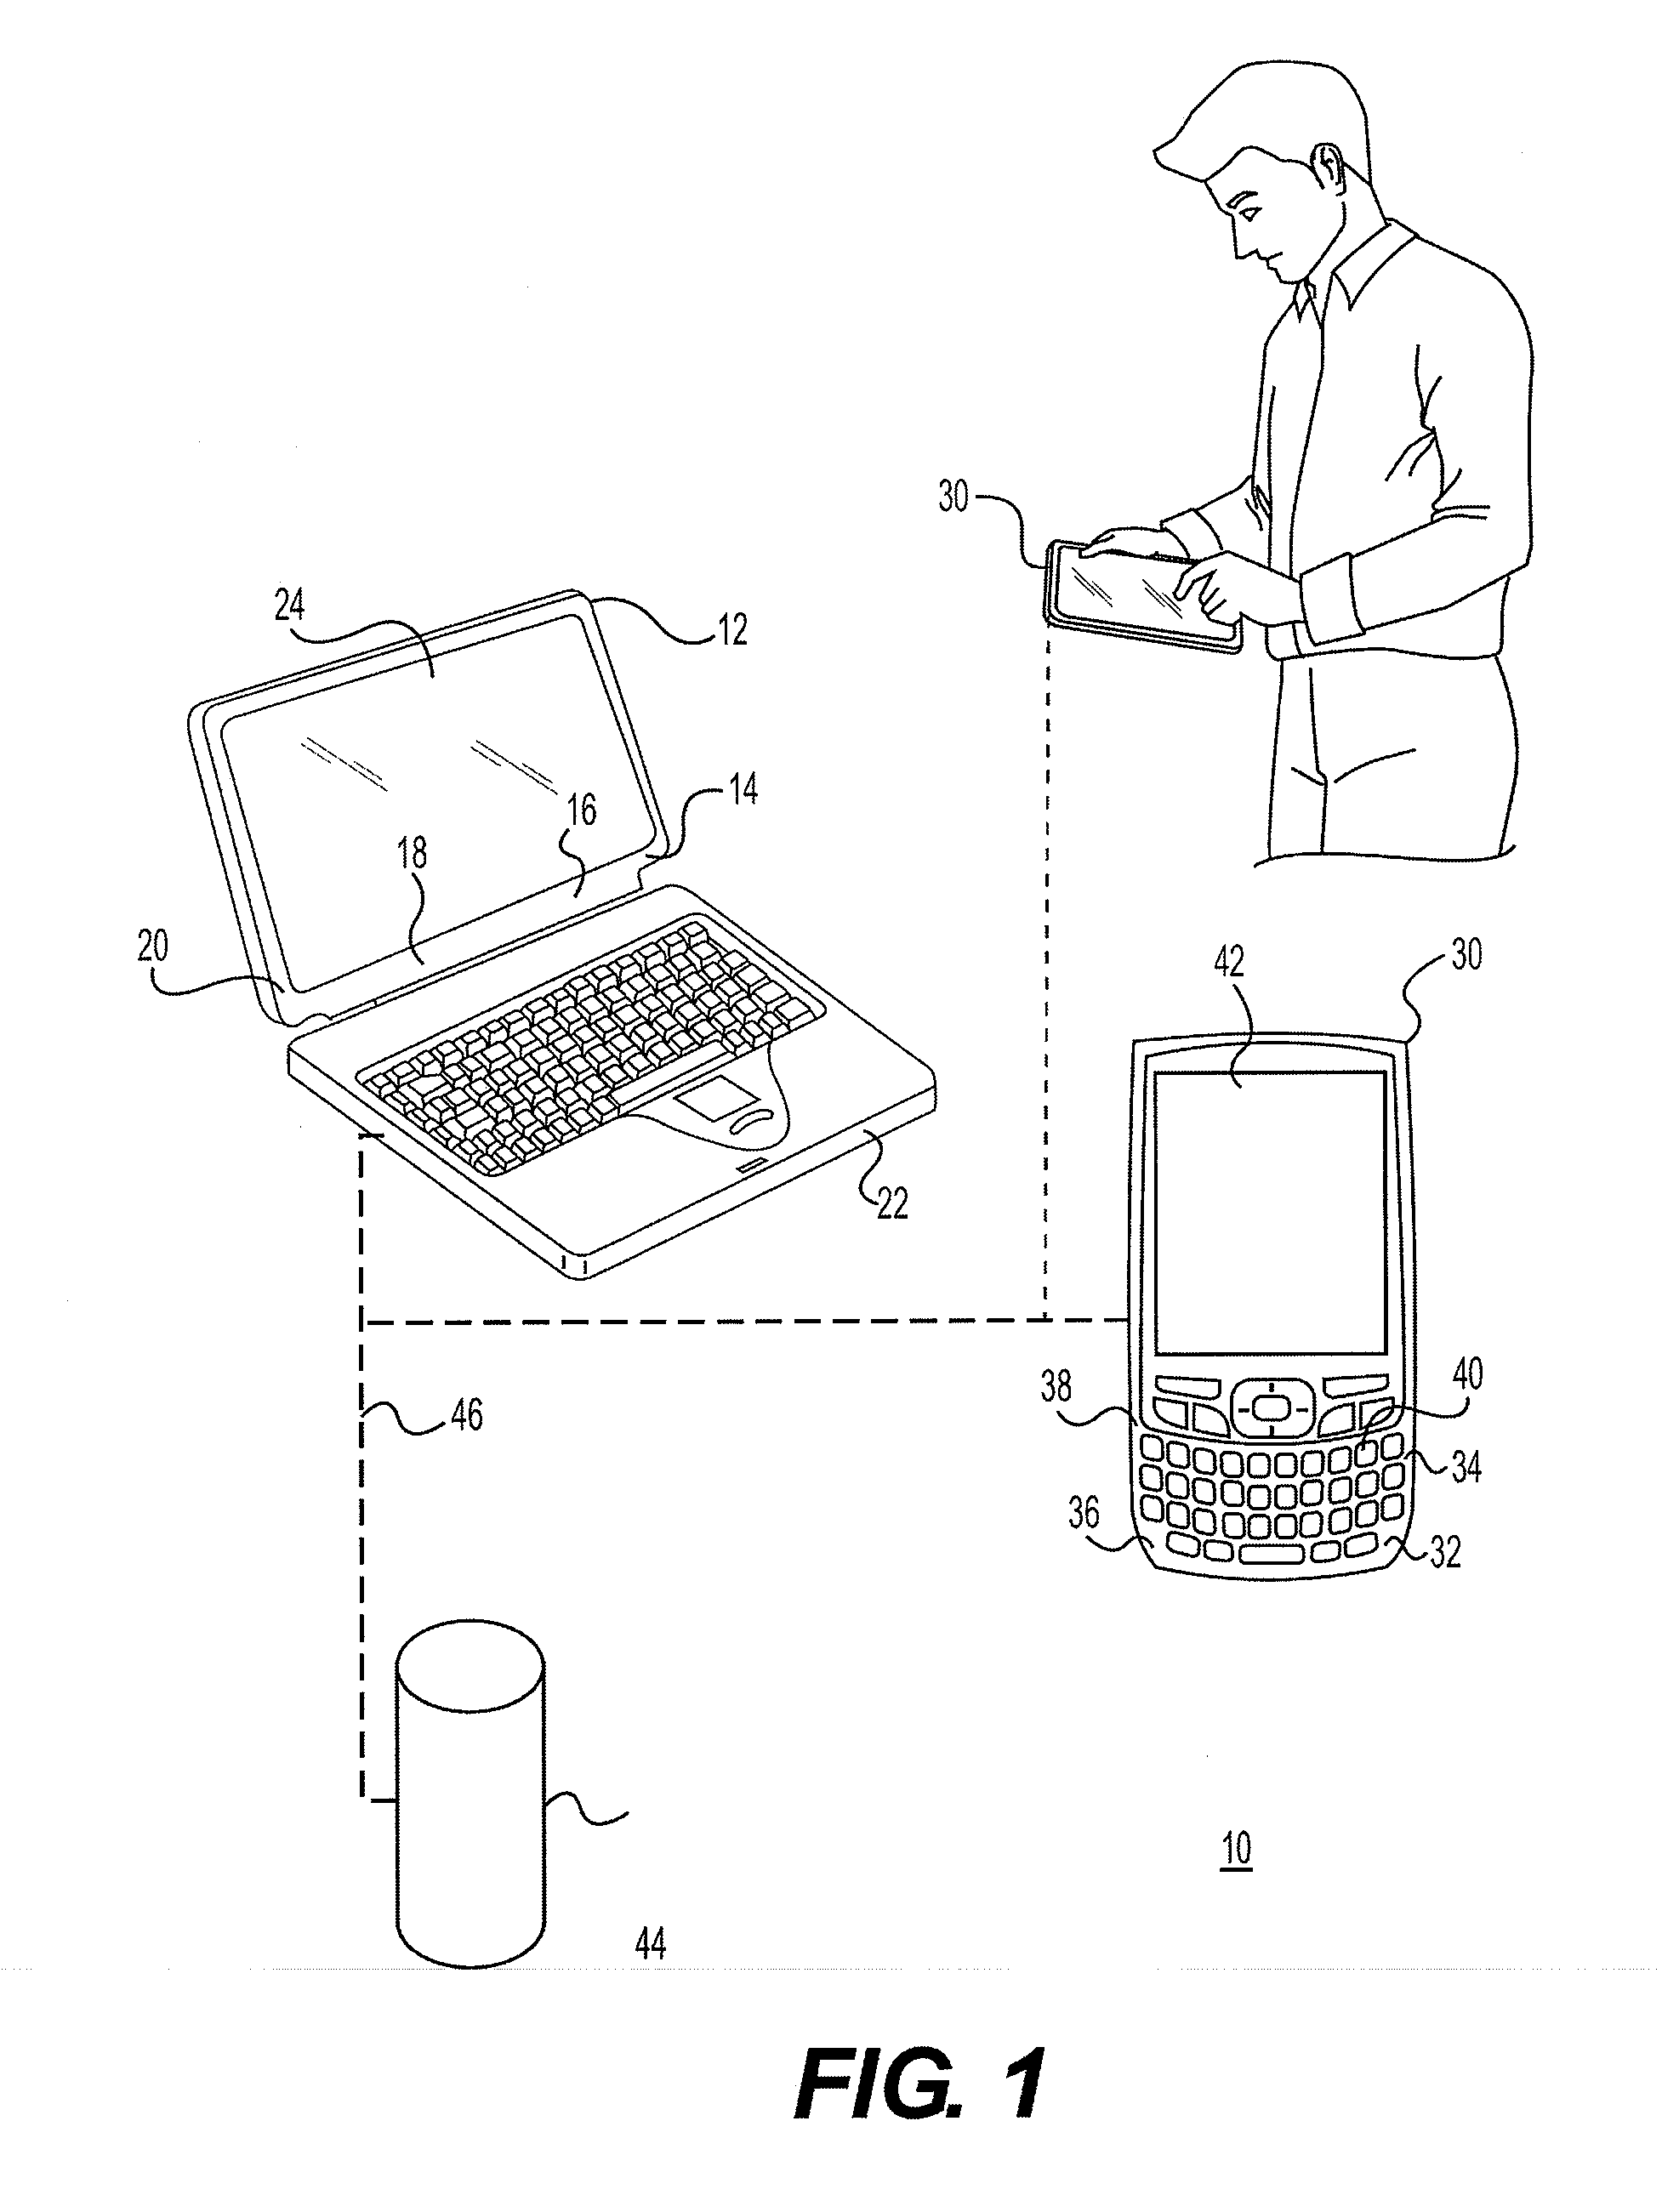 Critical test result management system and method